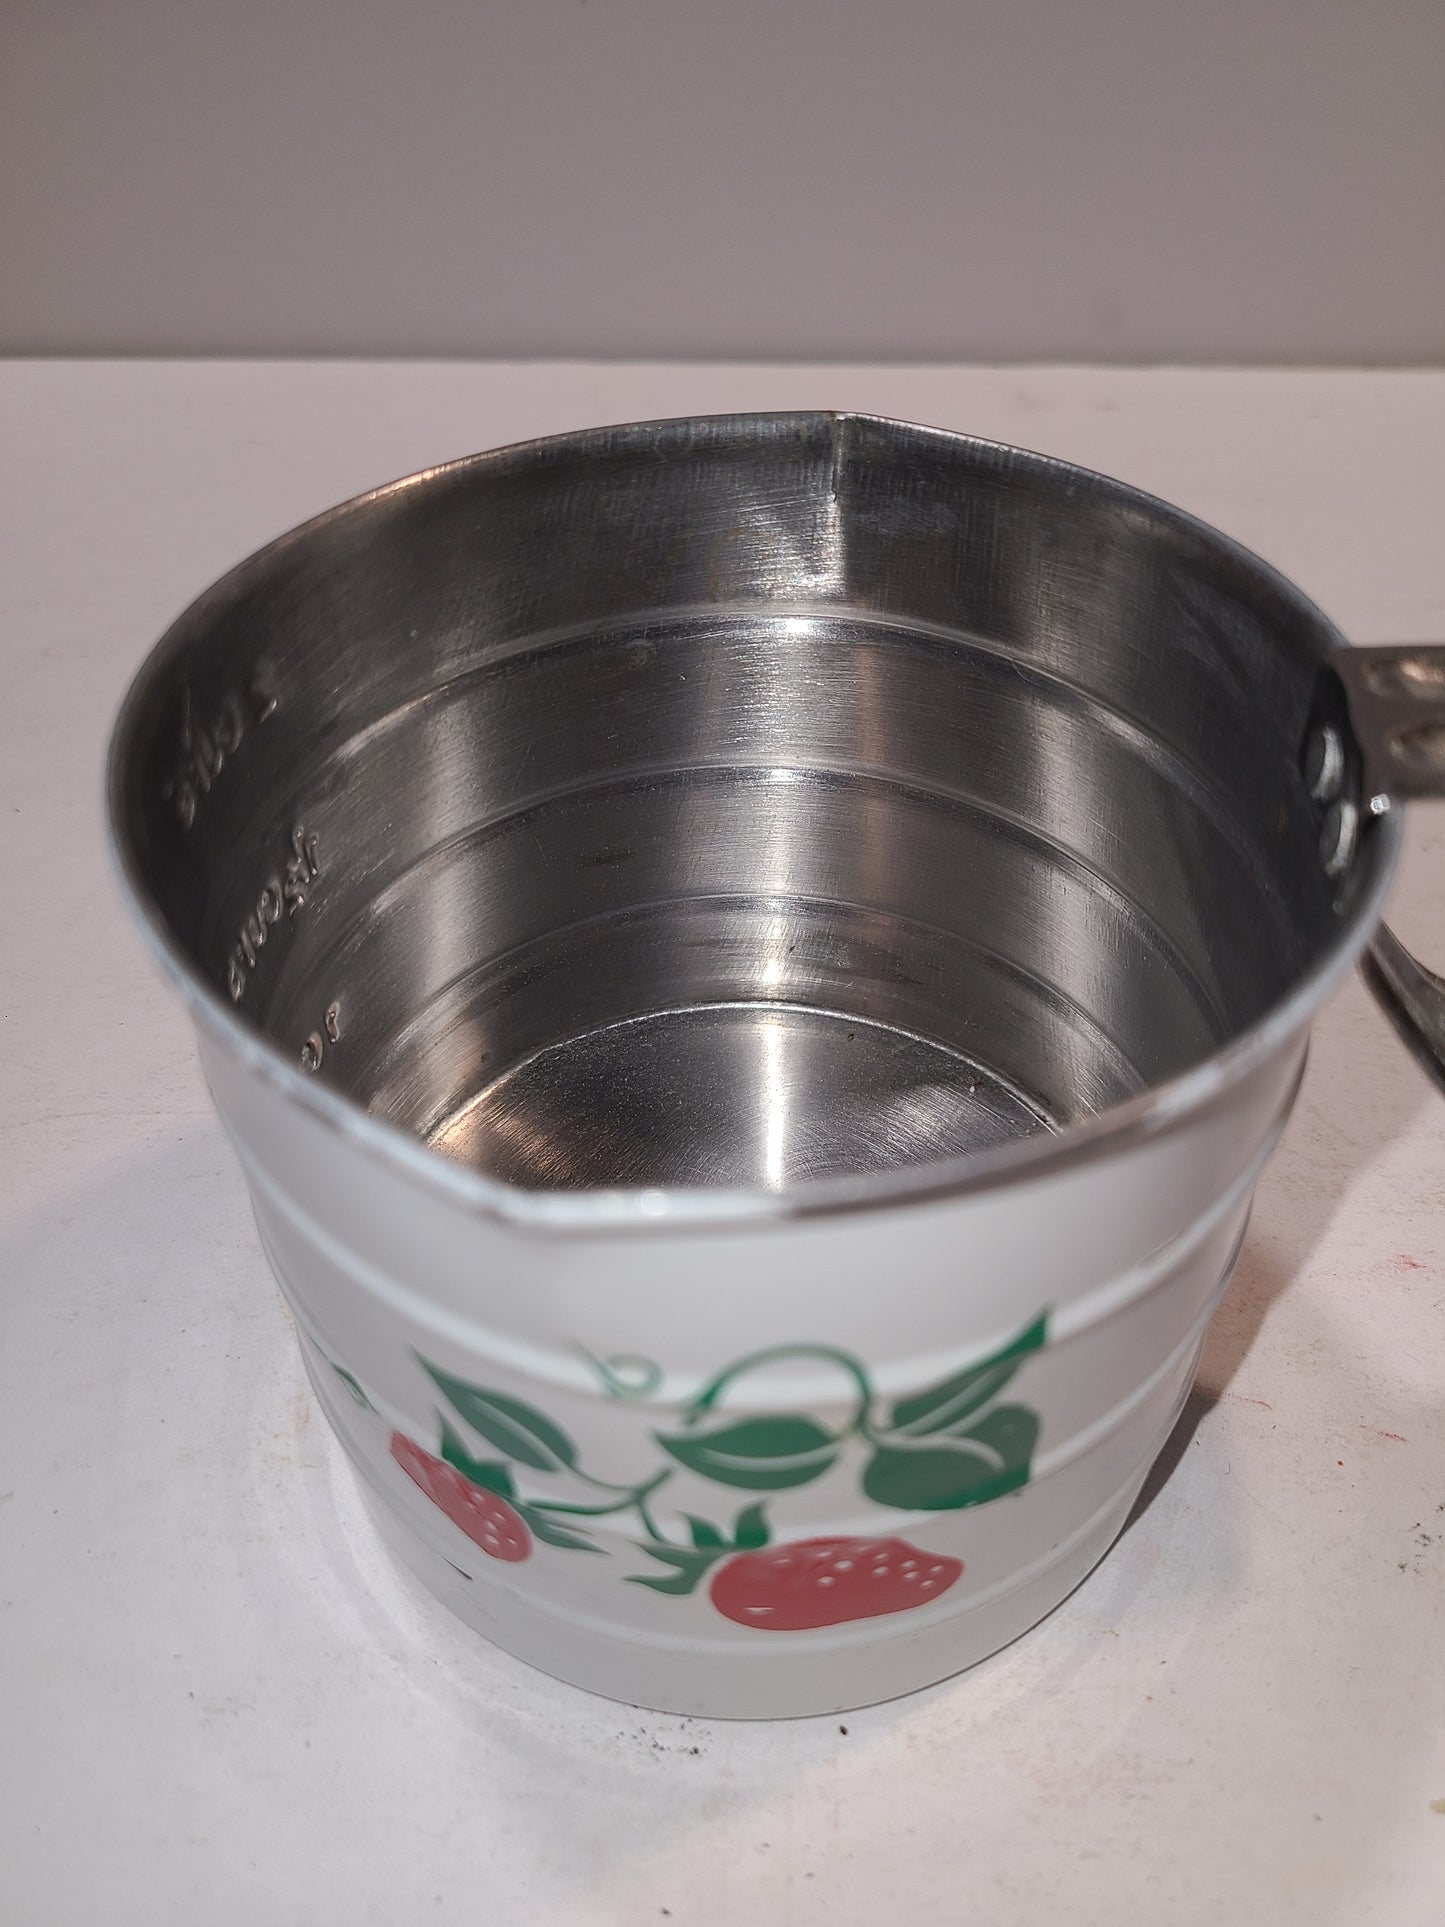 Vintage flour sifter and measuring cup Bromwells